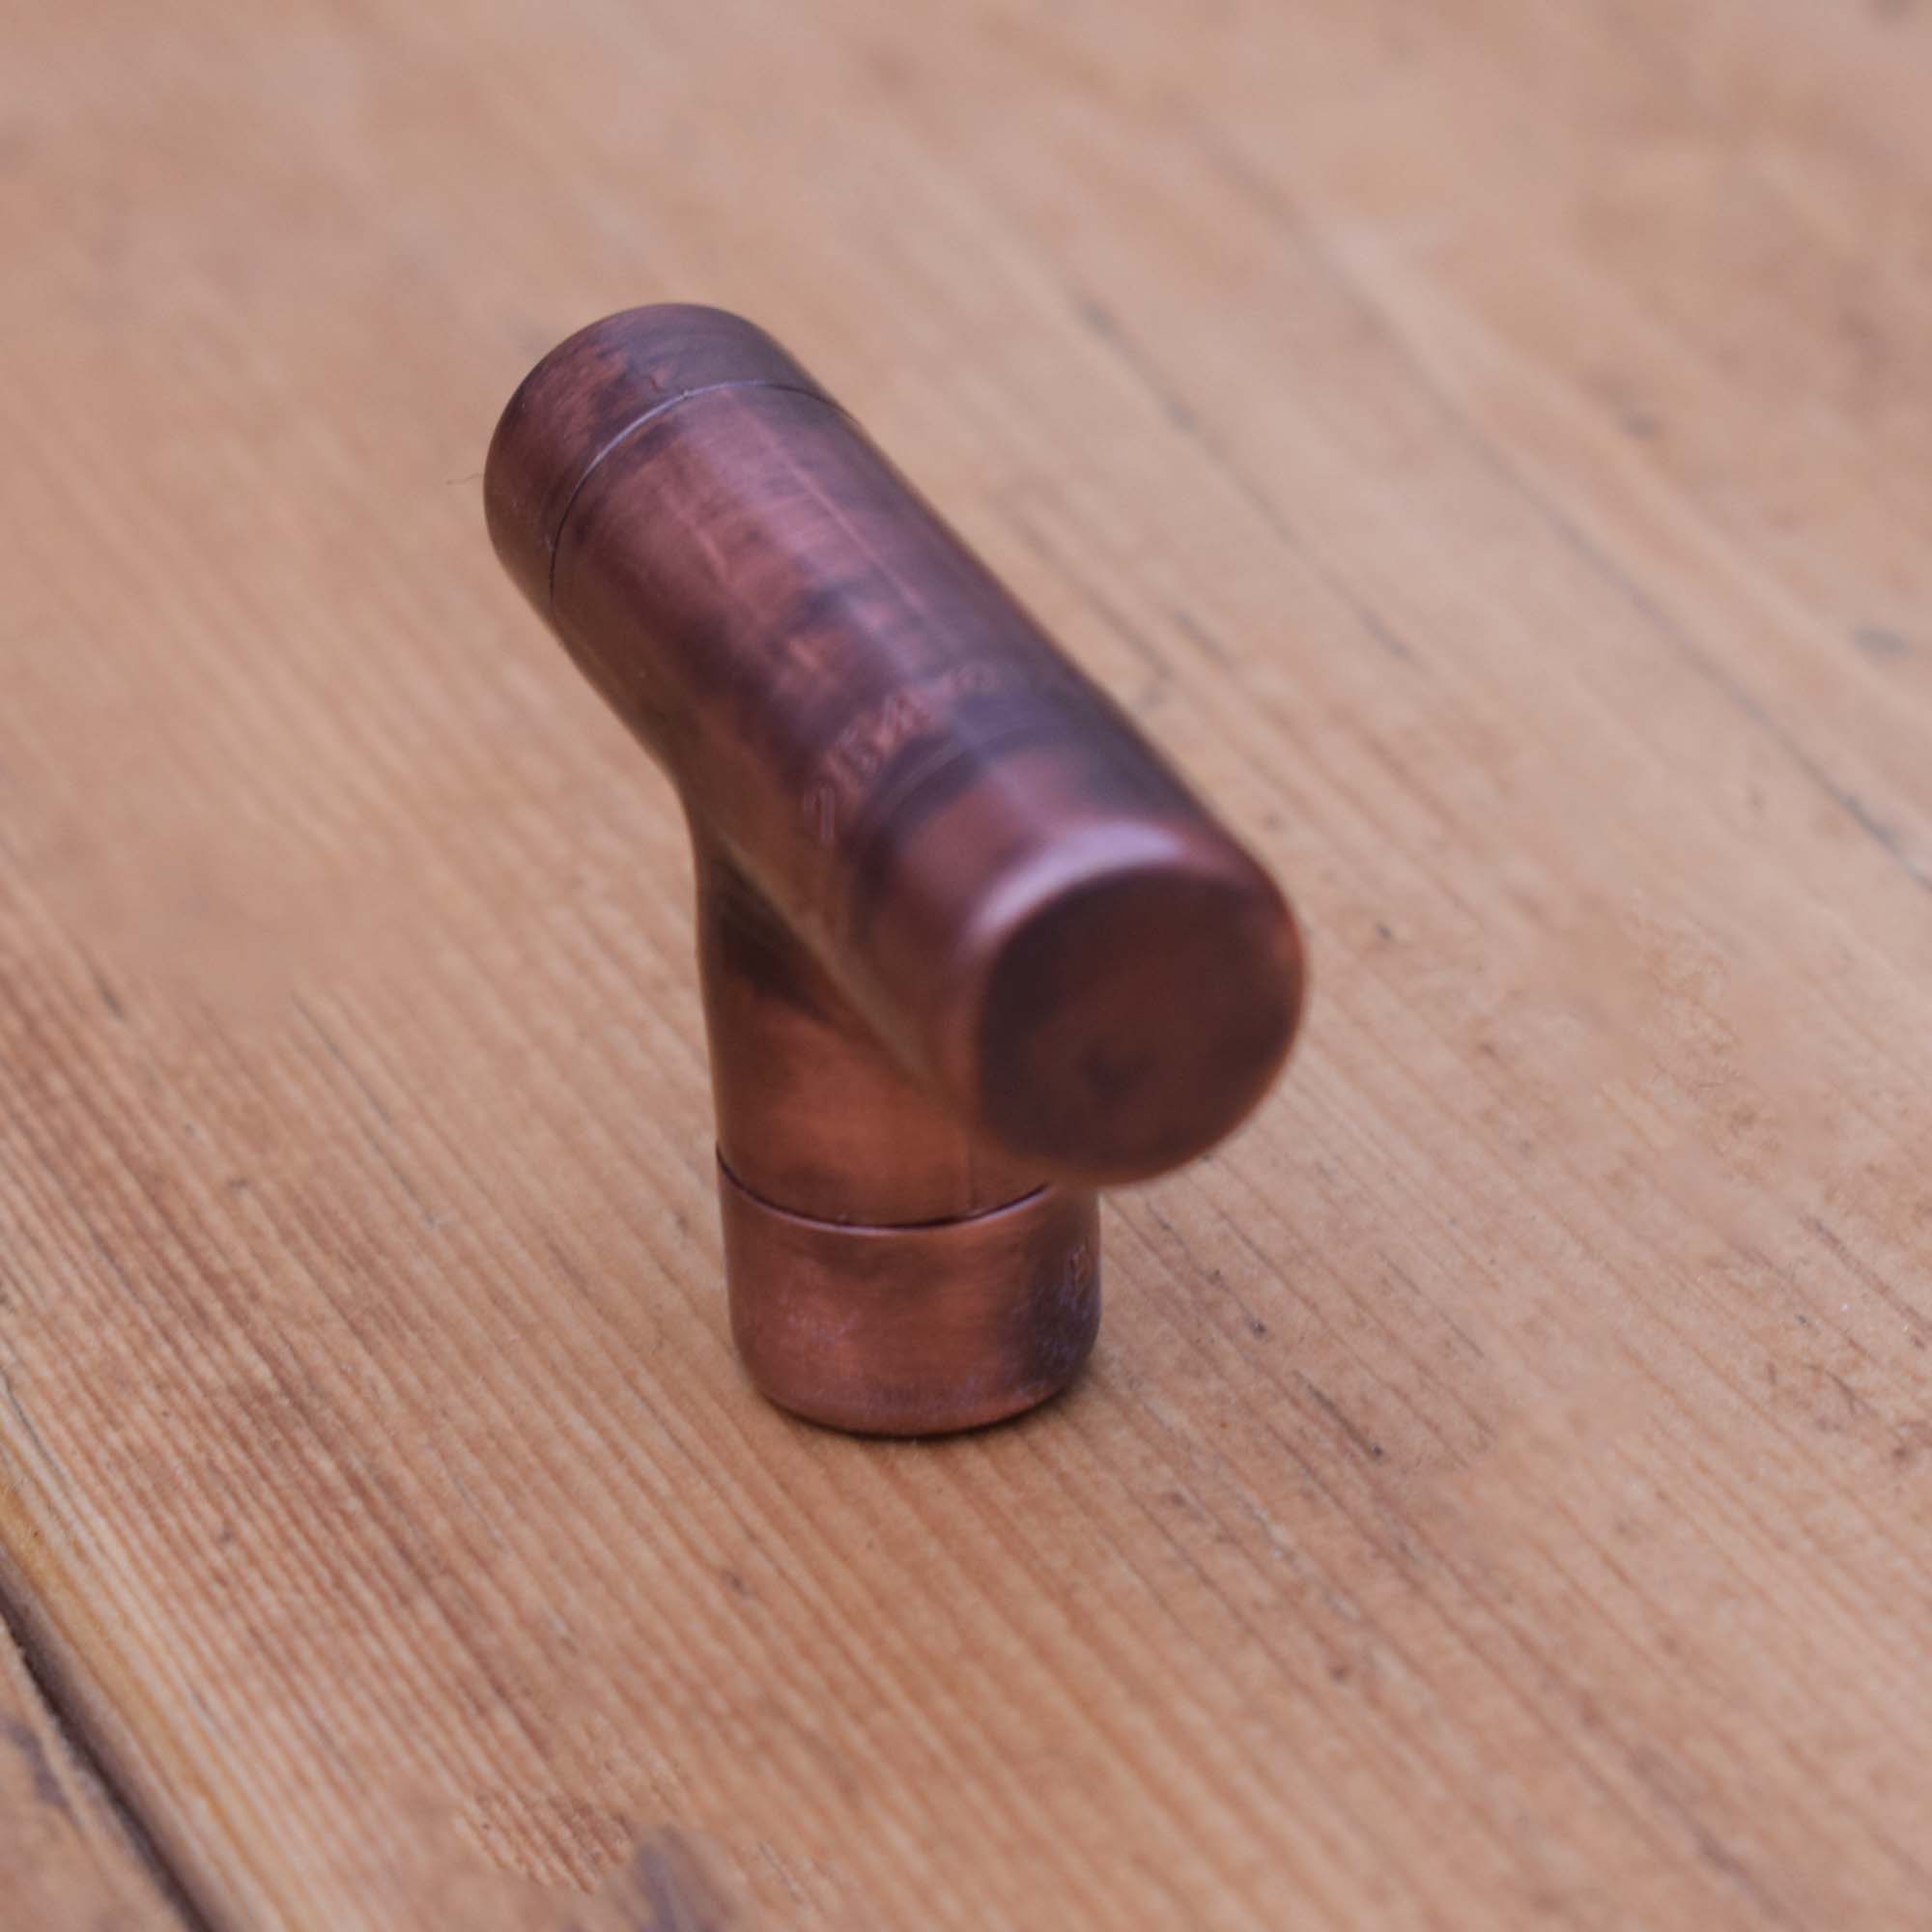 Aged Copper T-Knob on Wooden Cabinets